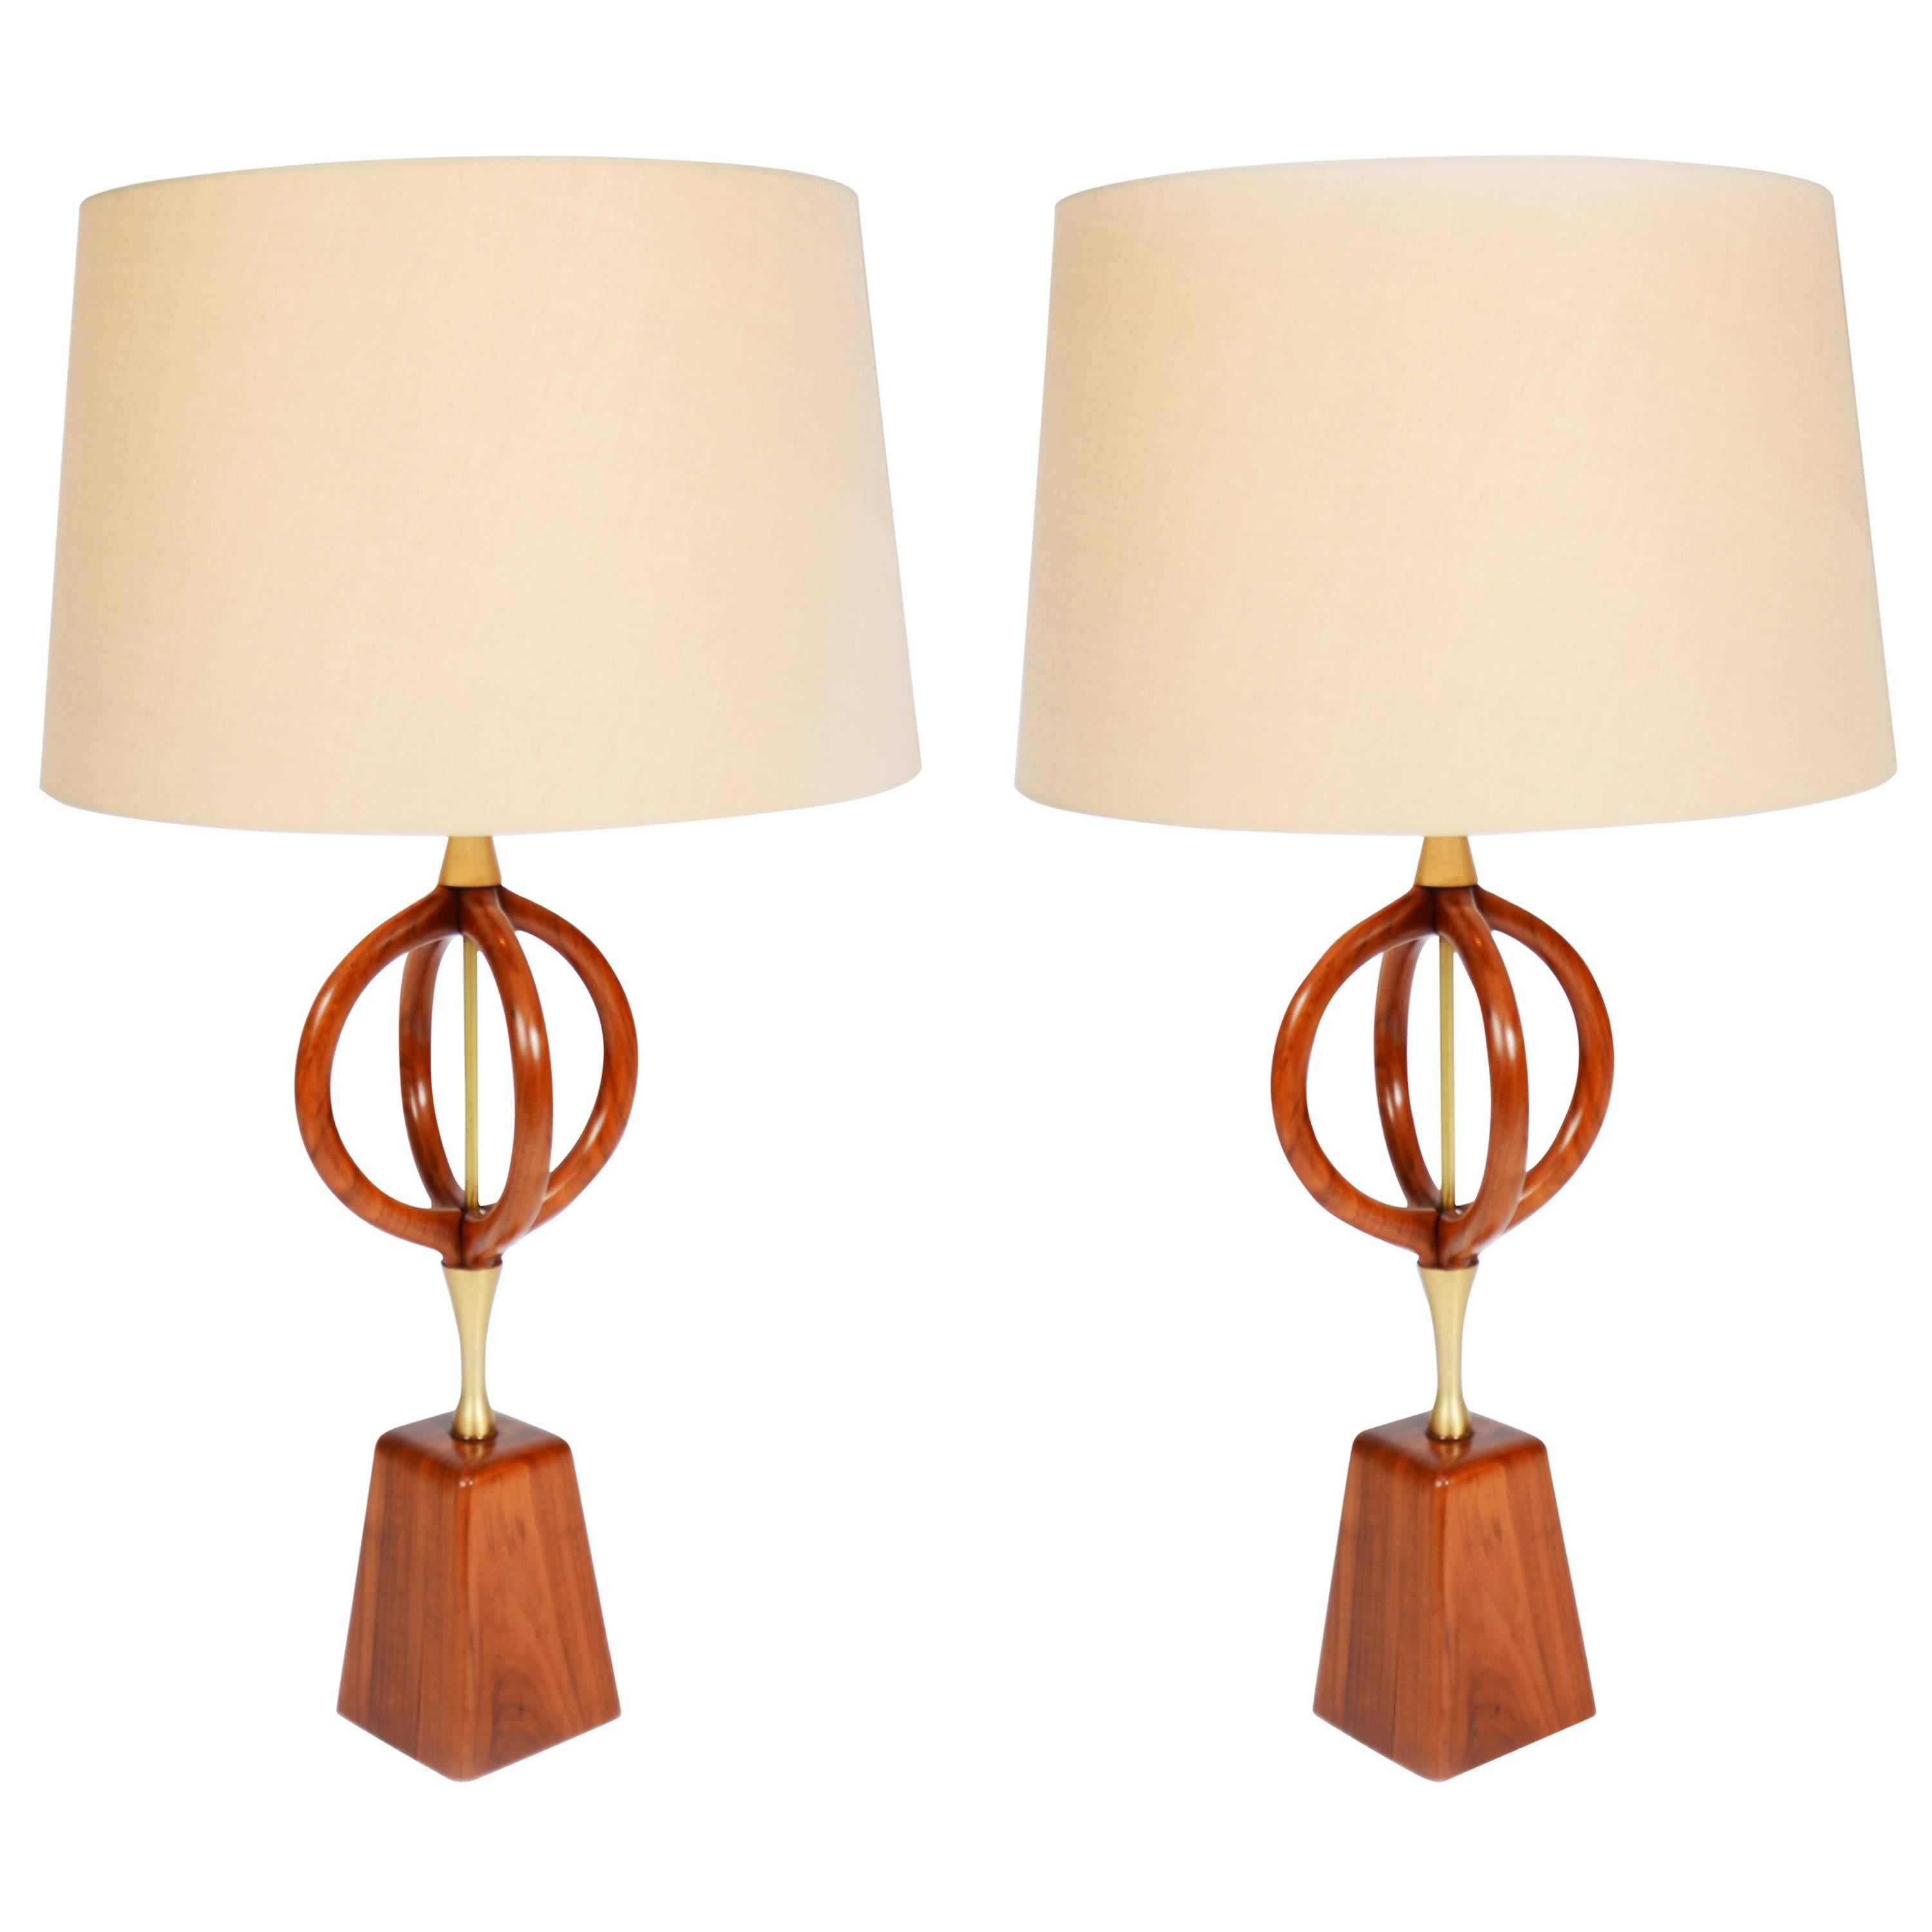 Pair of Orb Table Lamps